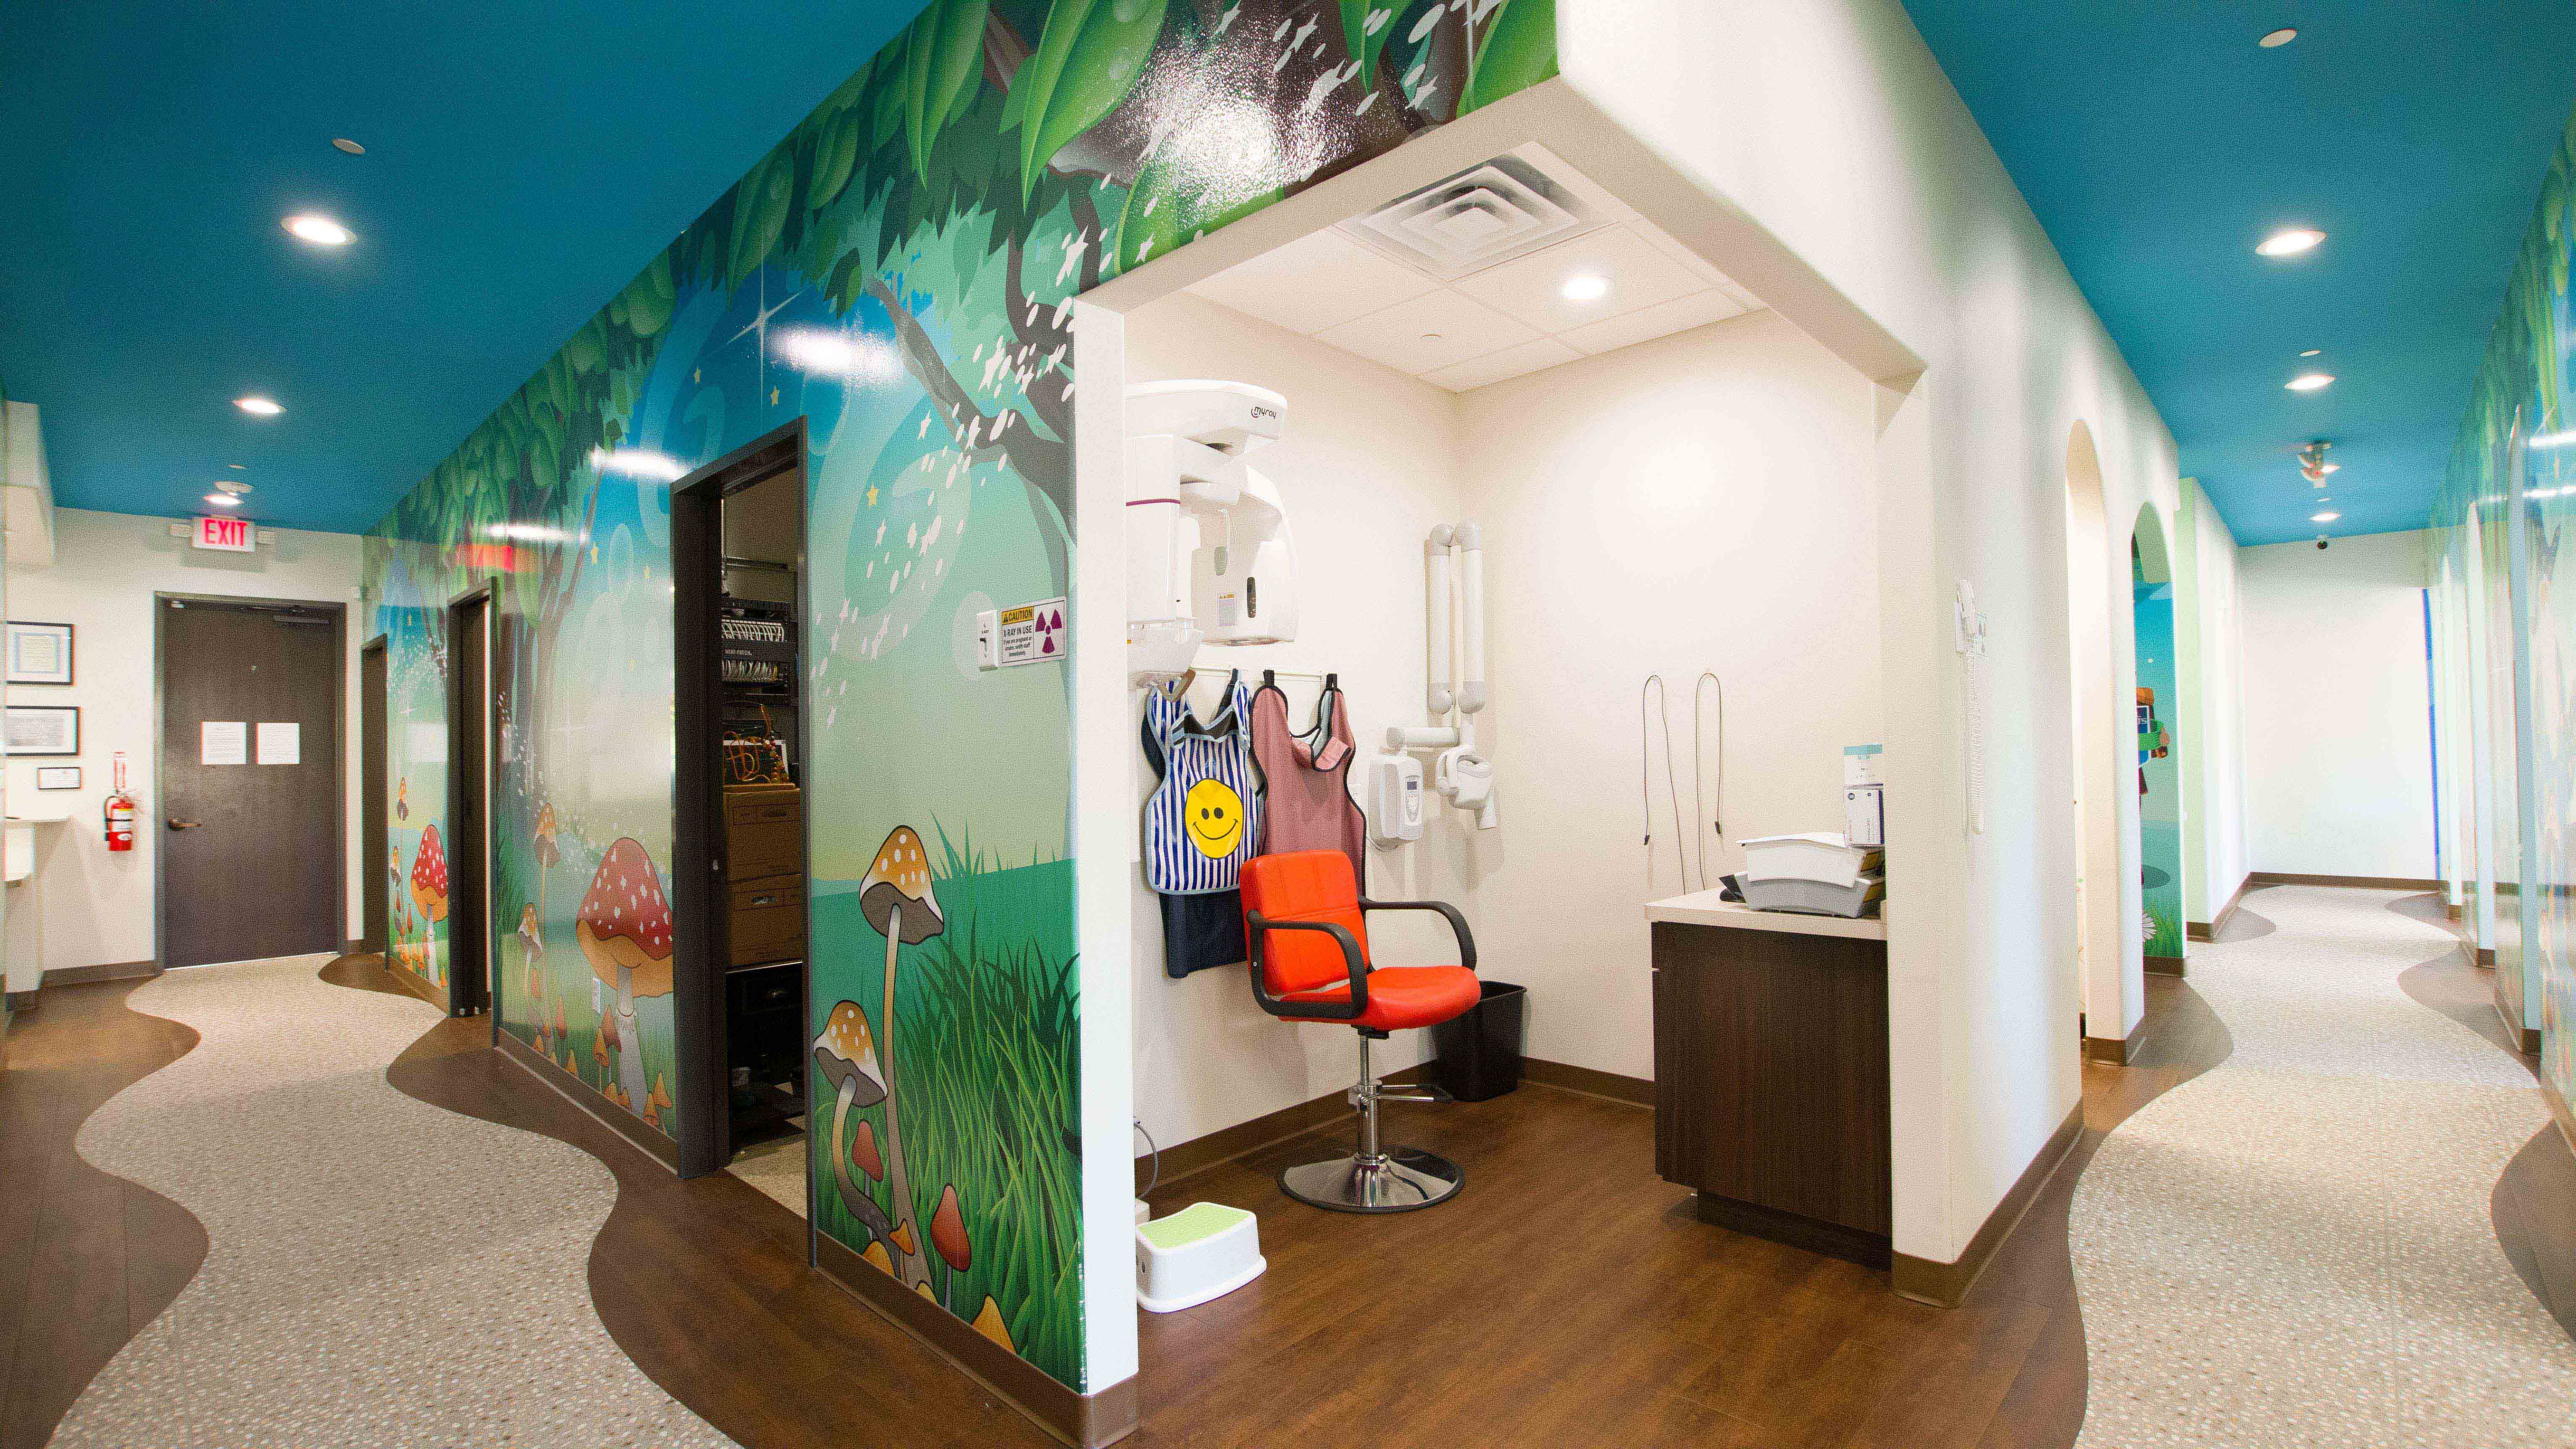 Dragons patined on dental treatment room walls